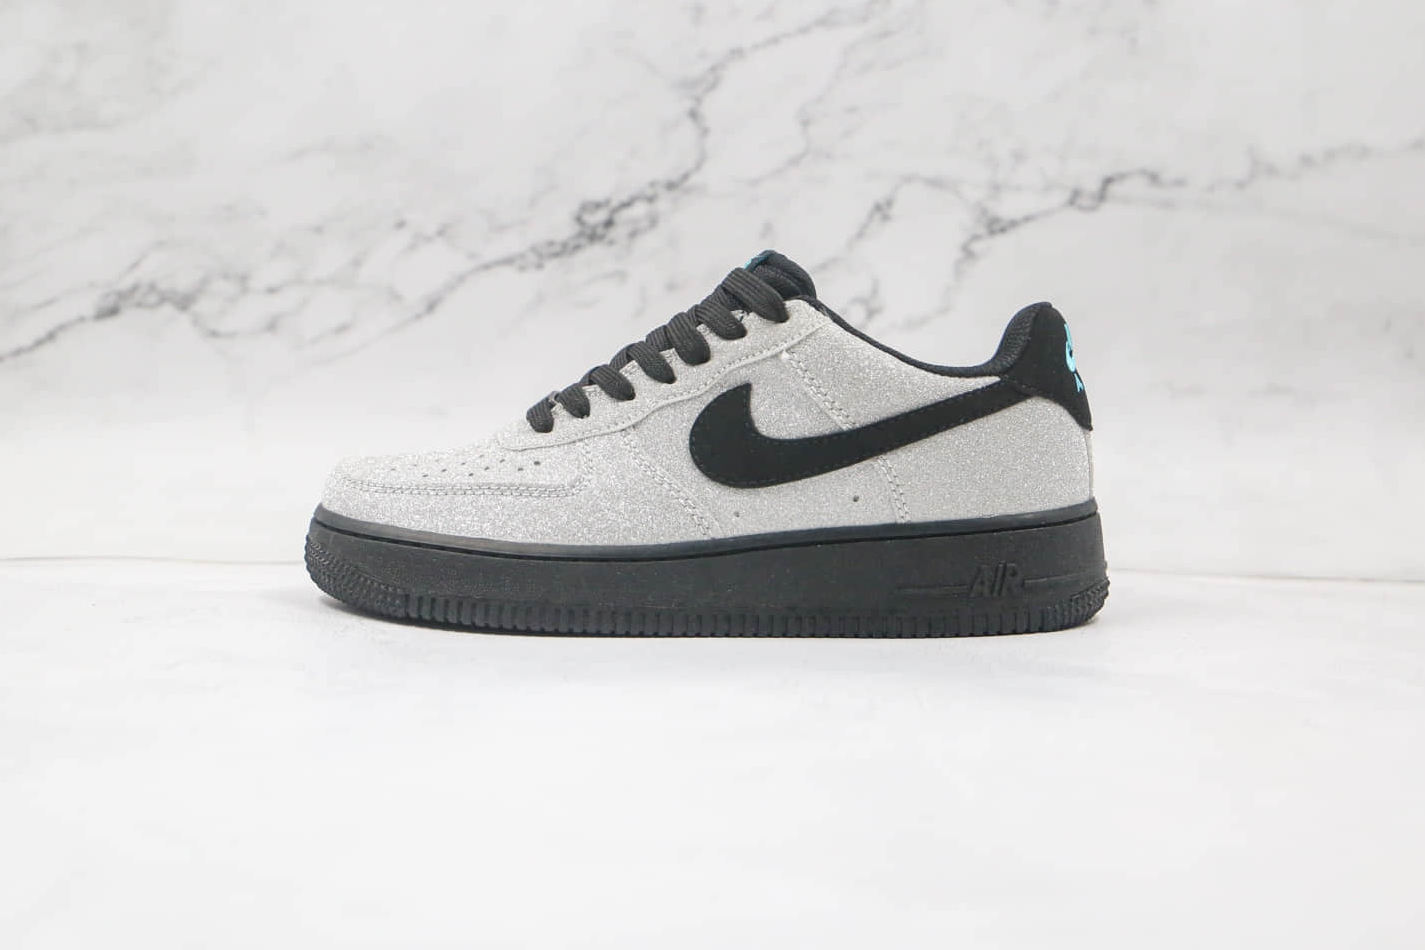 Nike Air Force 1 Low '07 LV8 'Diamond Quest' 718152-005 - Iconic Design with Exquisite Detailing